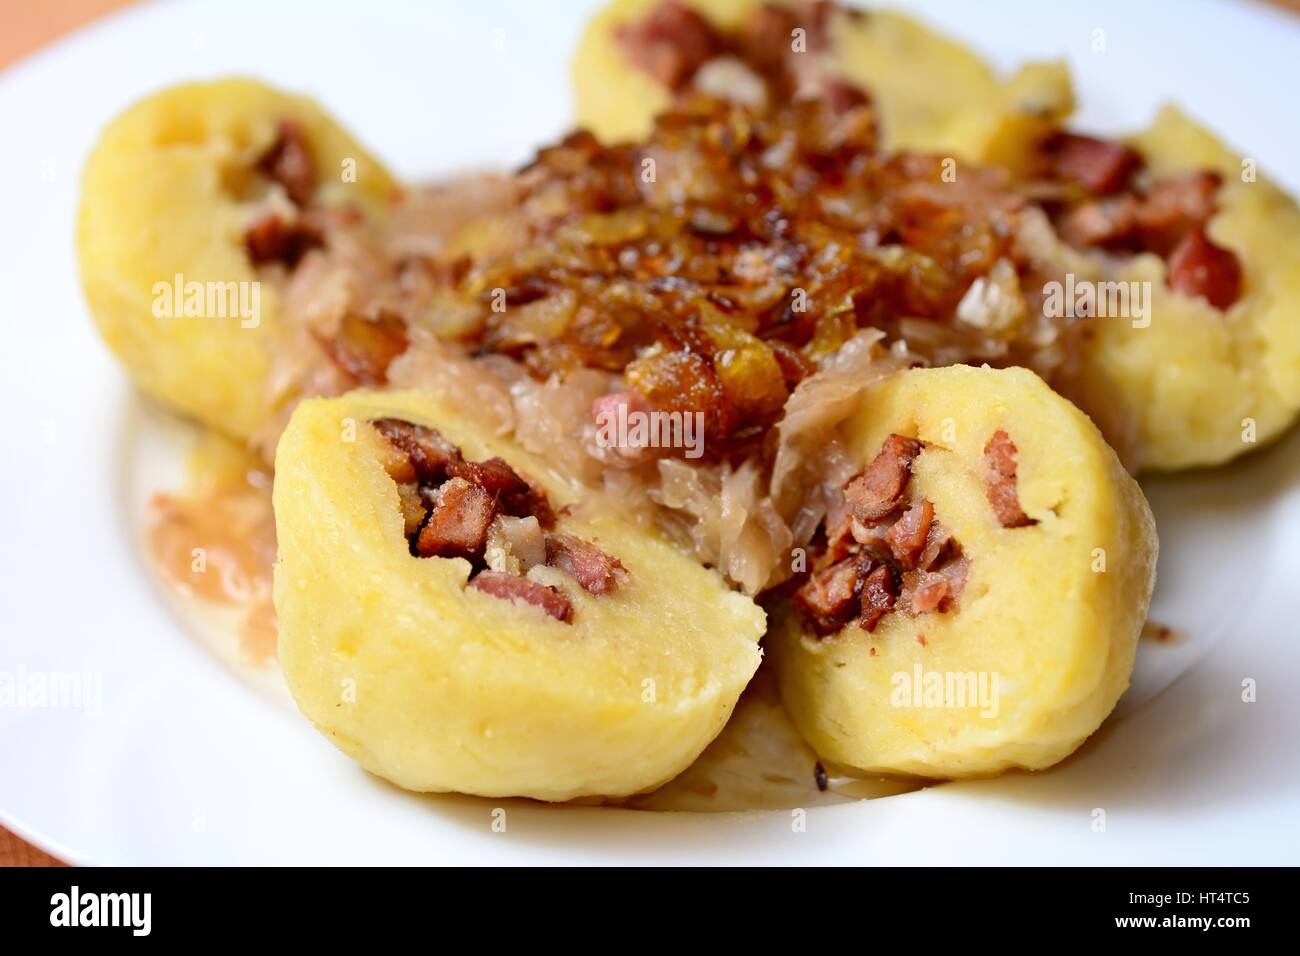 Portion of the sliced traditional czech potato dumplings stuffed with smoked meat, braised cabbage and fried onion. Stock Photo